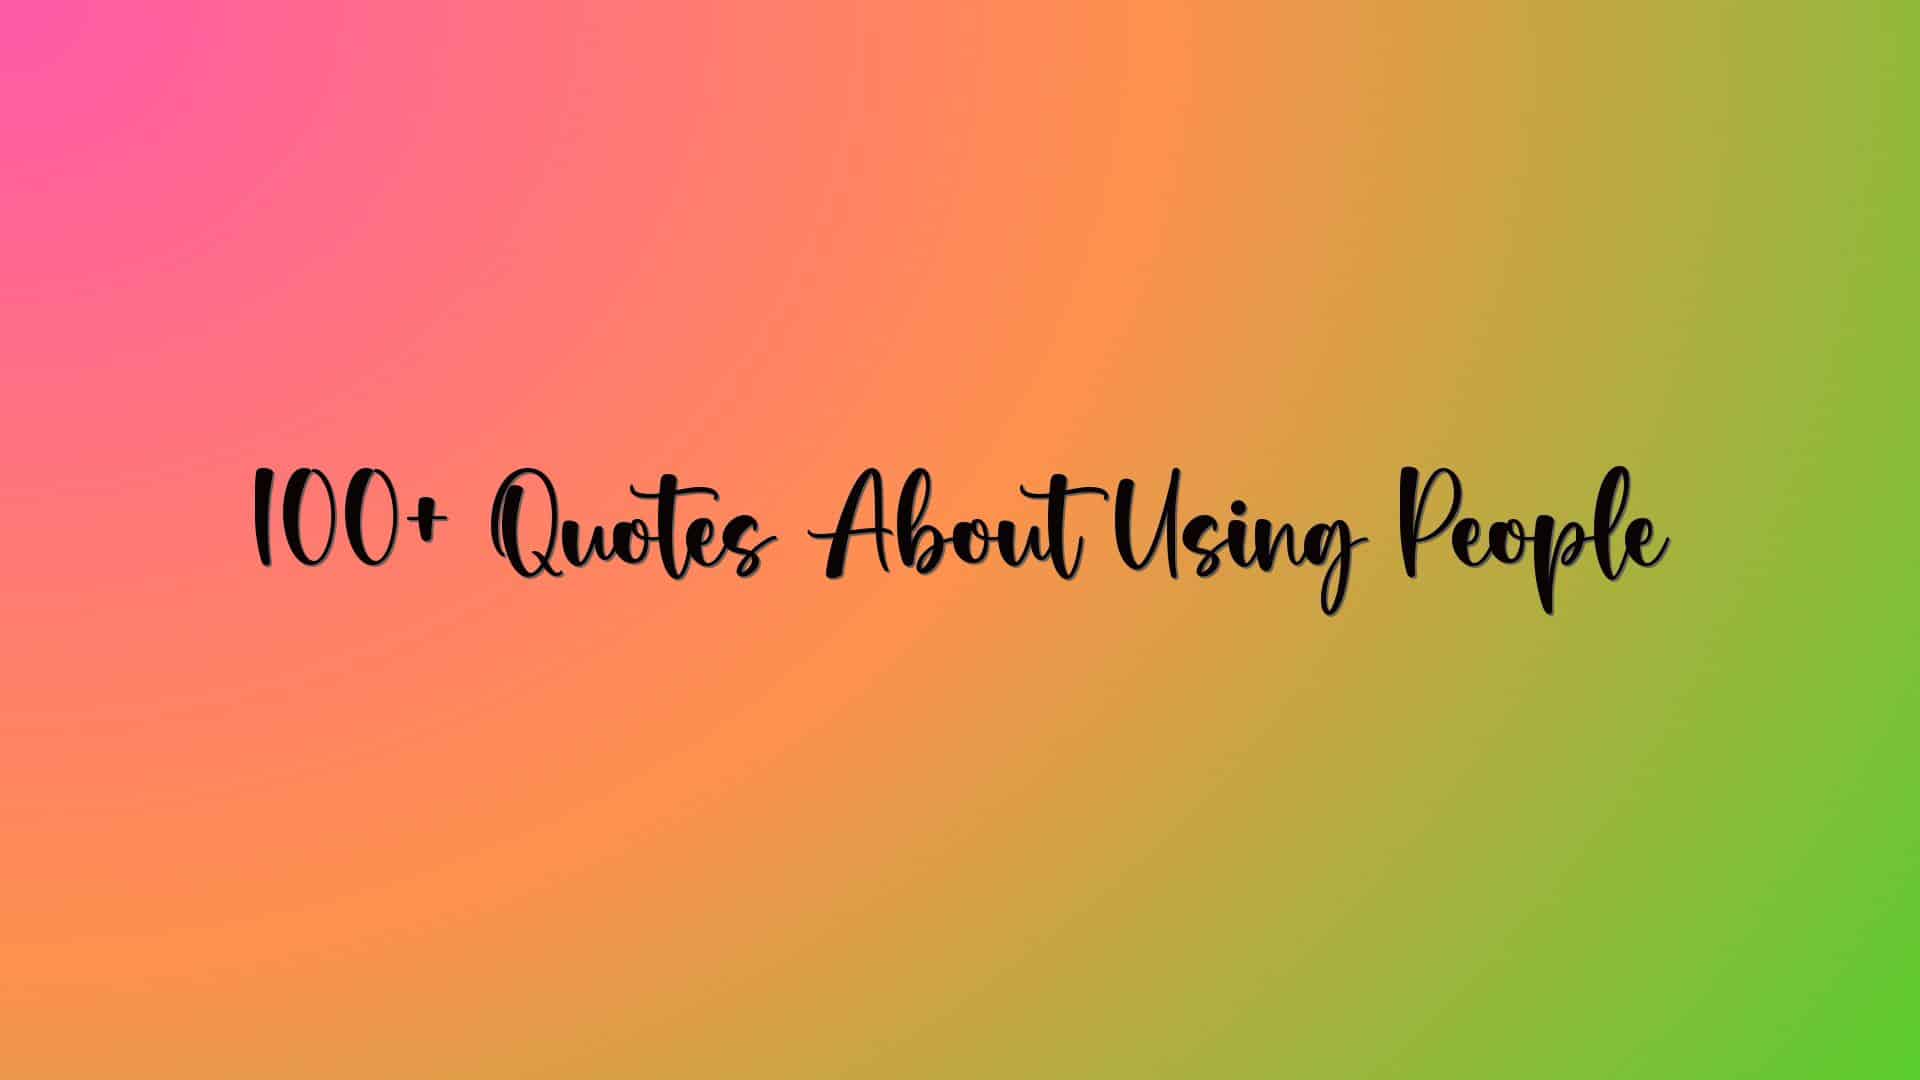 100+ Quotes About Using People